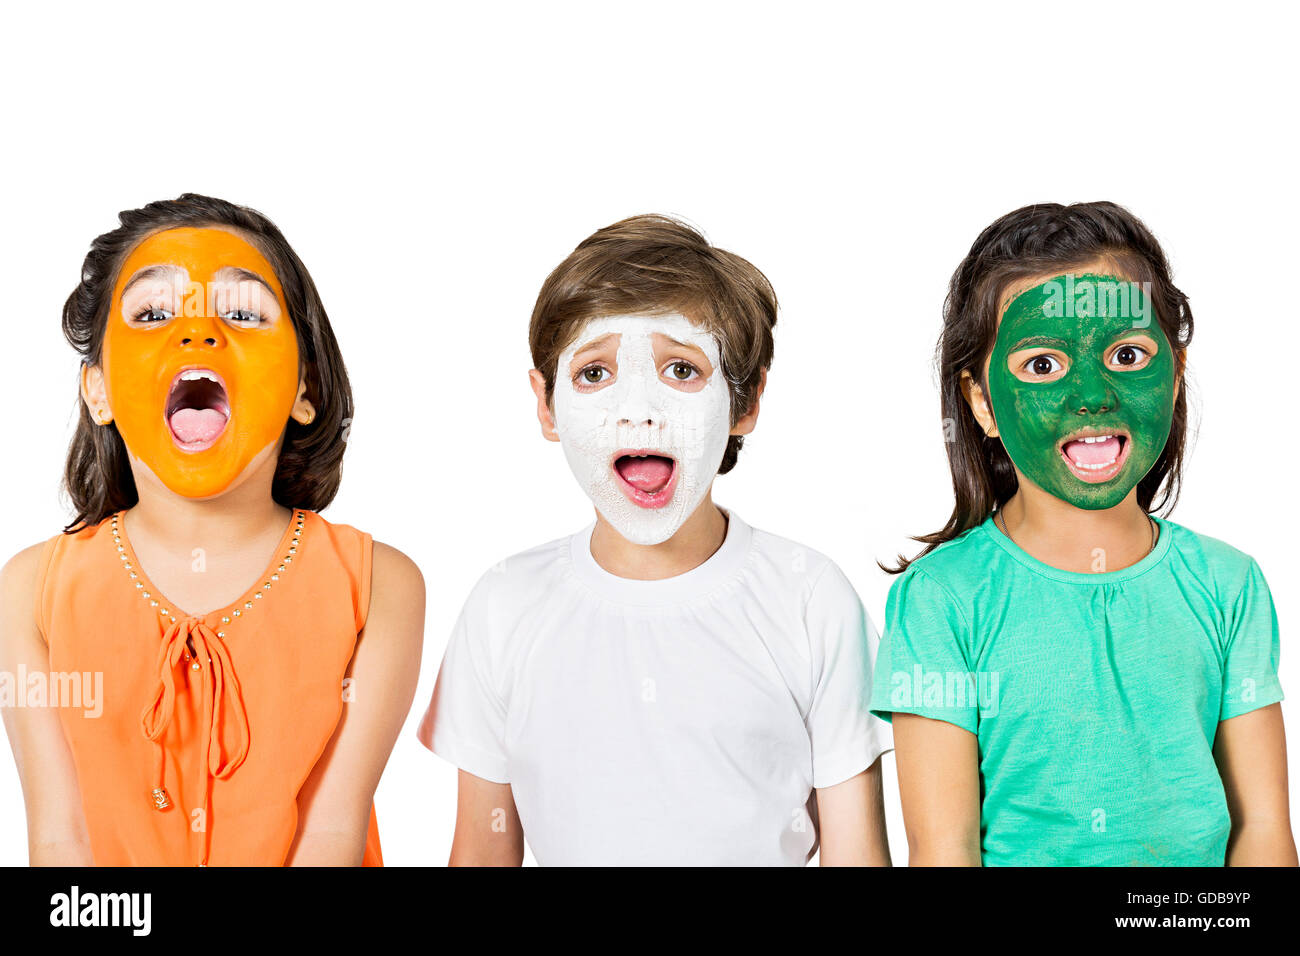 3 indians Kids friends Independence Day face paint Standing Stock Photo